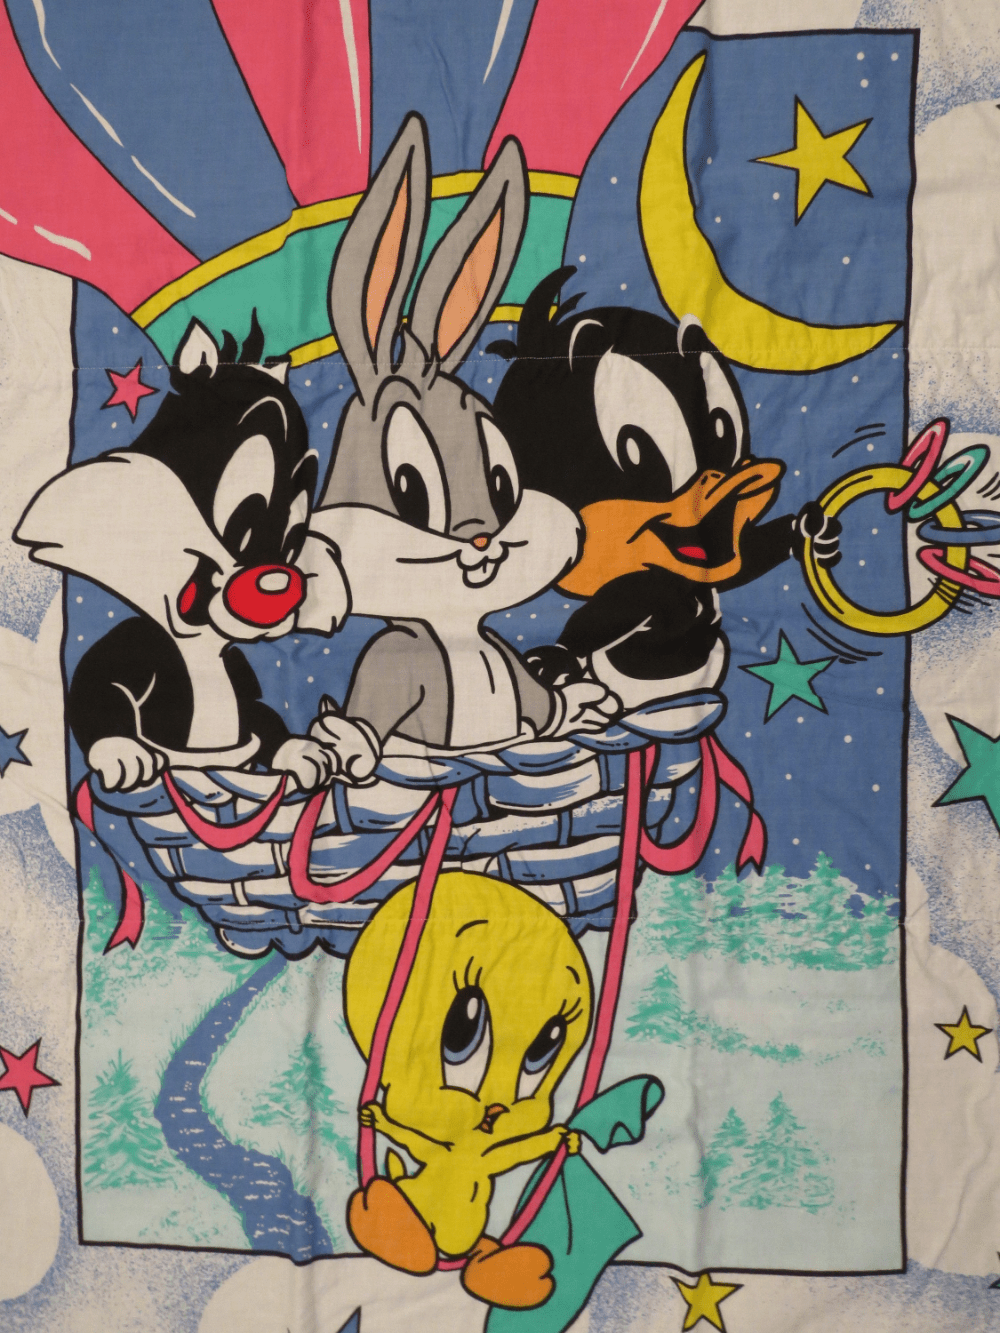 A 1990s Looney Tunes duvet cover featuring Bugs Bunny, Daffy Duck and Taz, in a hot air balloon. - Looney Tunes